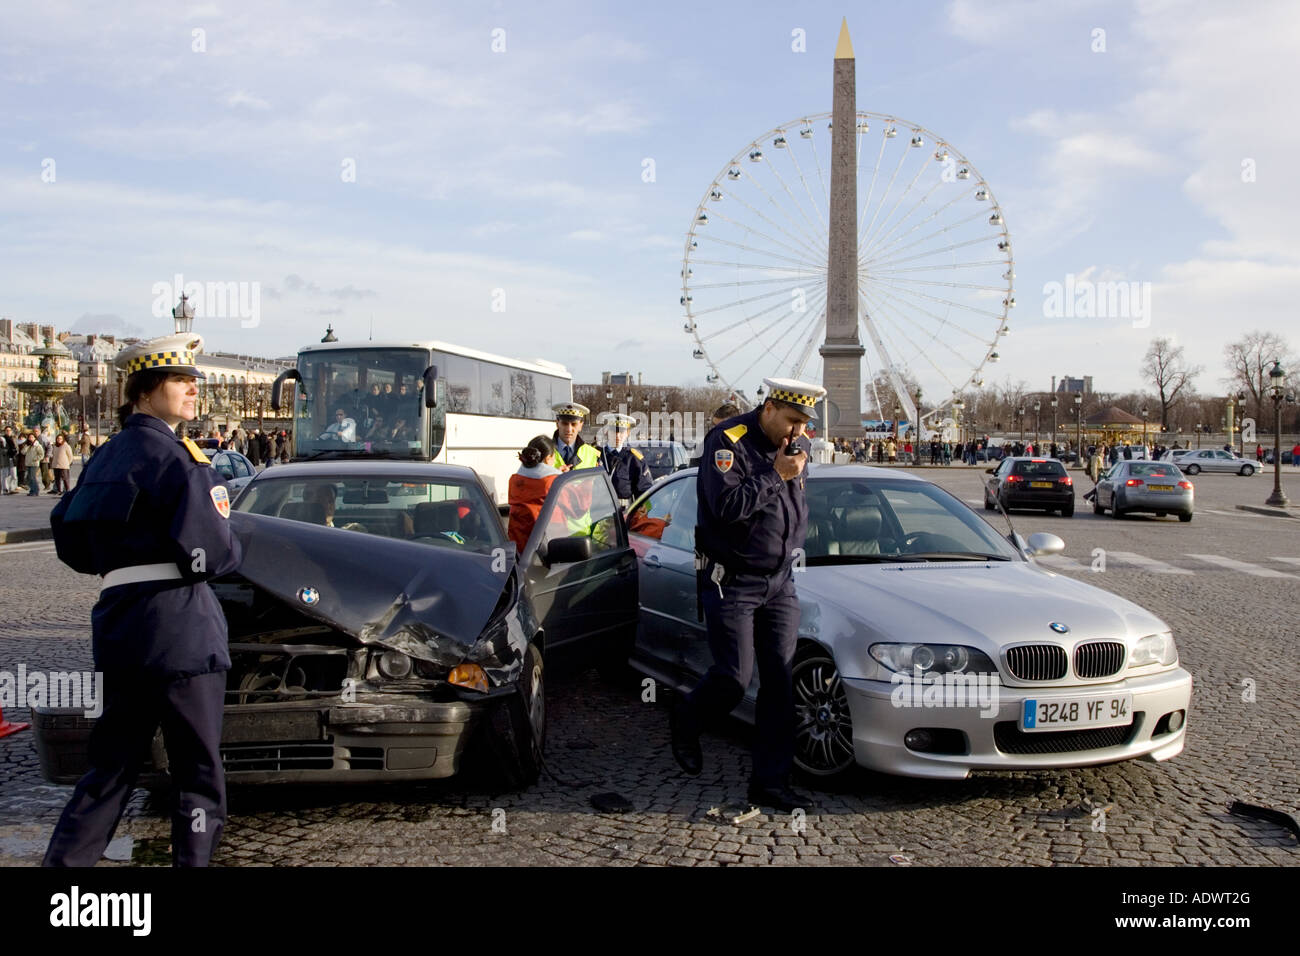 Traffic police investigate car accident between two BMW cars in Place de la Concorde Central Paris France Stock Photo